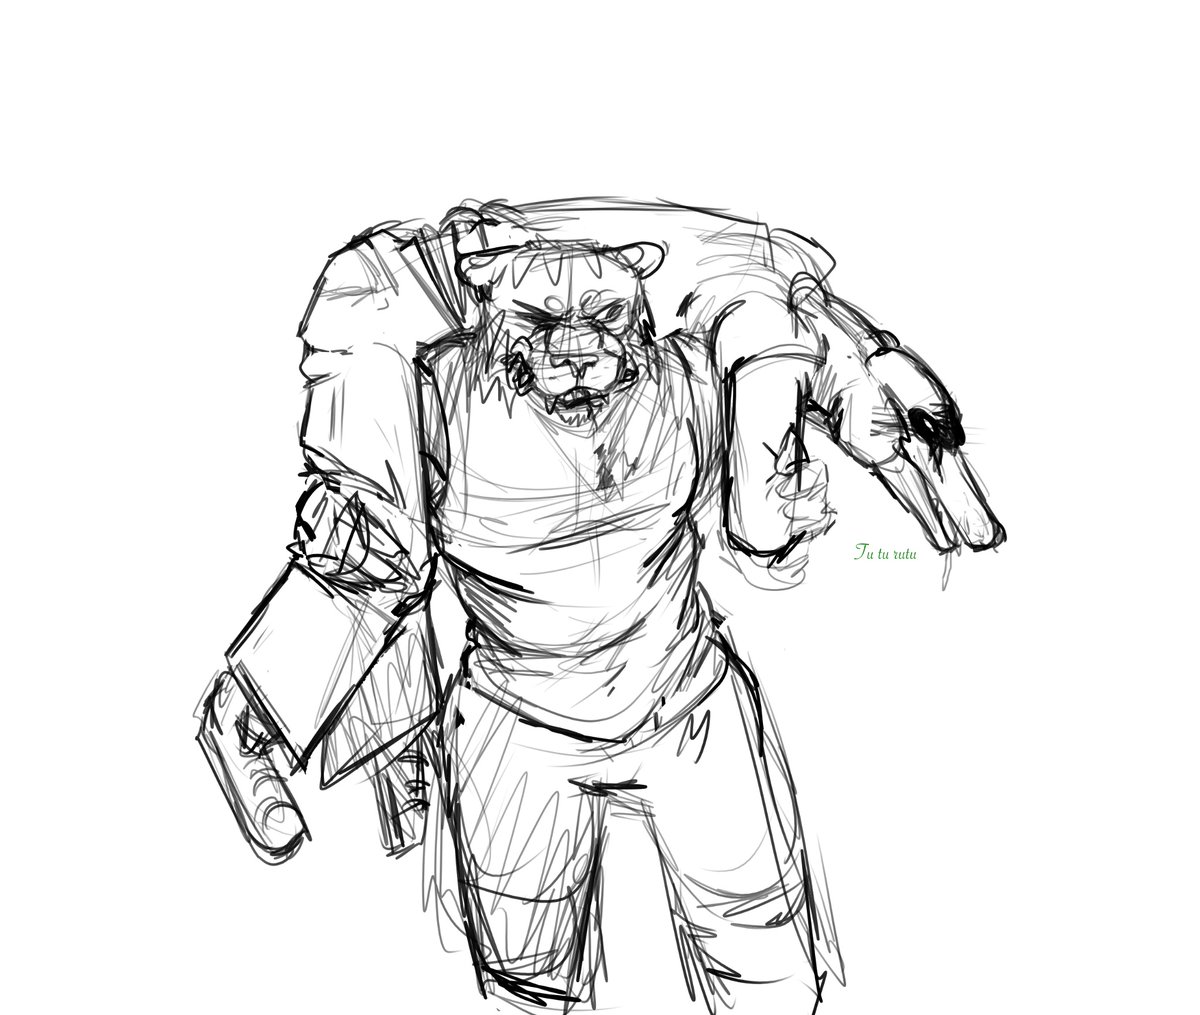 Ash looks like a lightweight, they have to carry him back into the car

#hotlinemiami